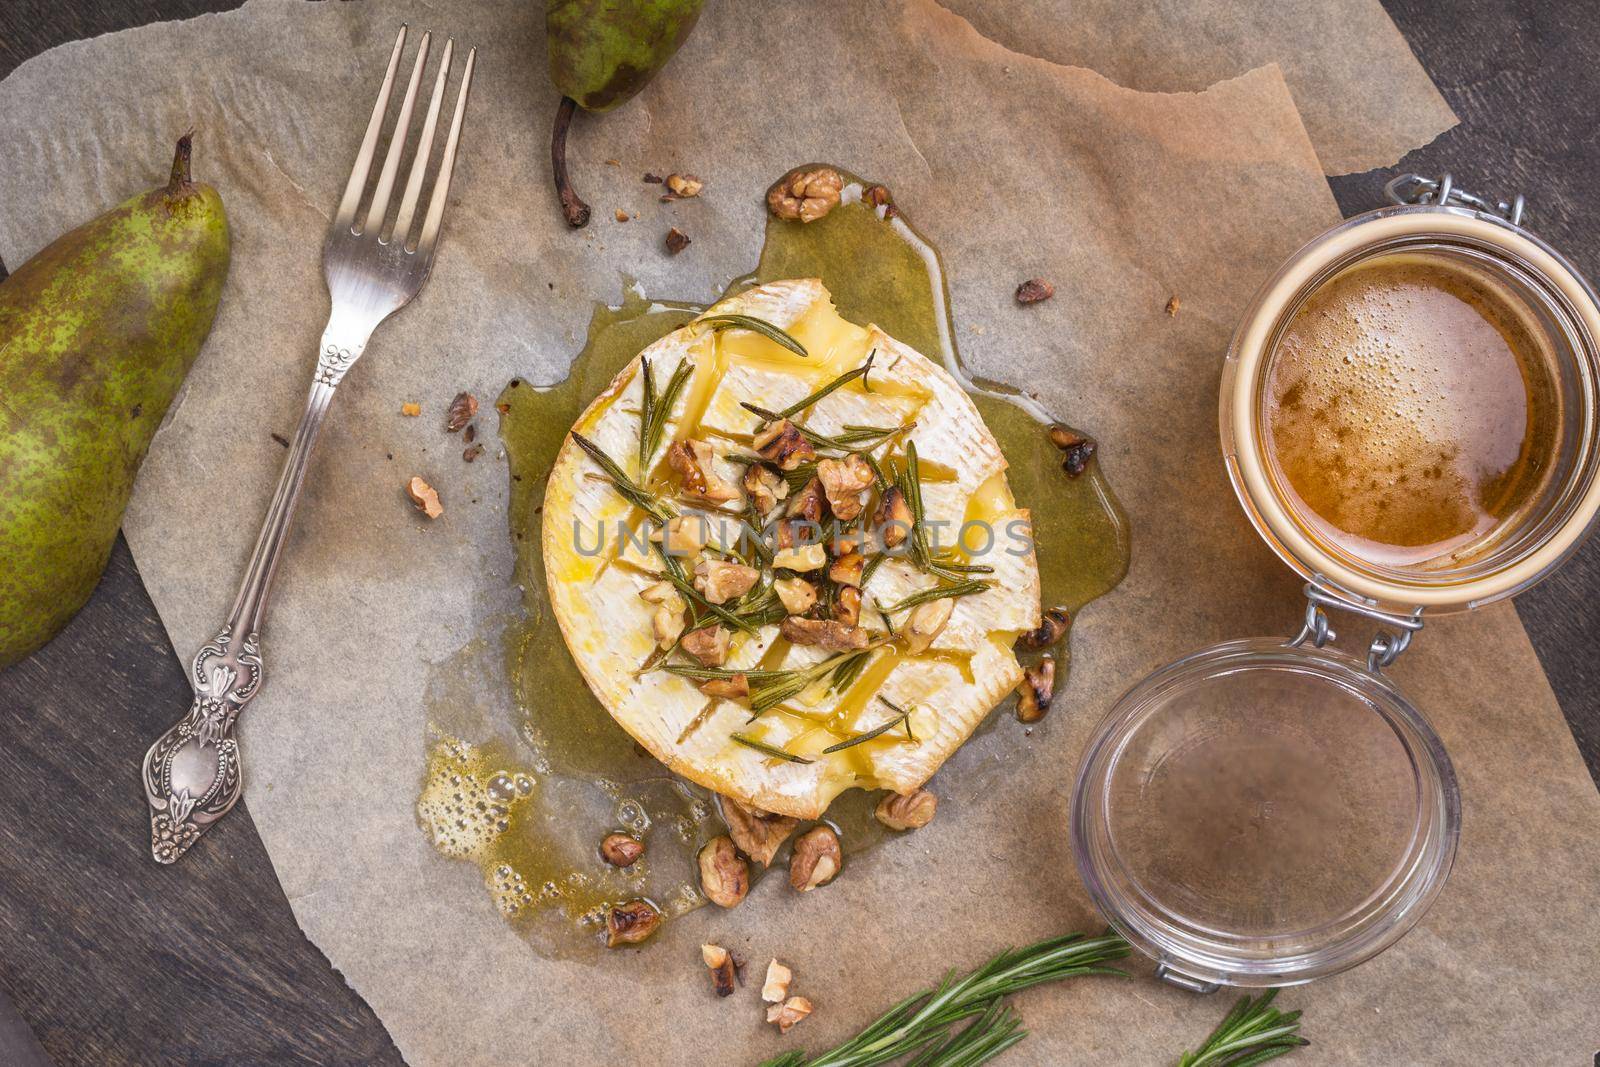 Delicious baked camembert with honey, walnuts, herbs and pears by its_al_dente